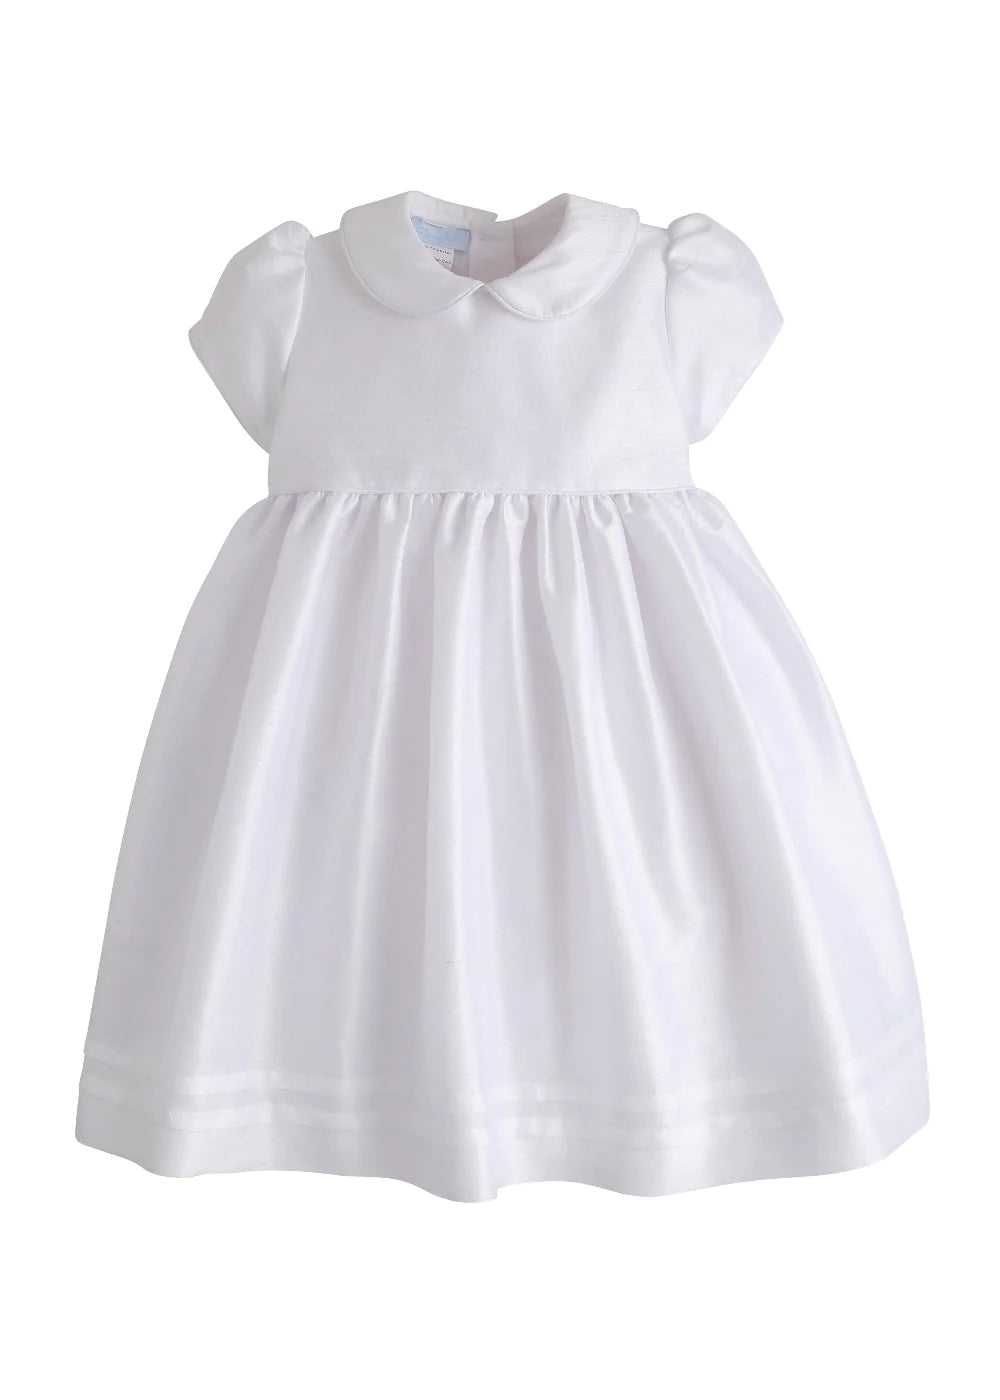 Peter Pan Formal Dress - Special Occasion White